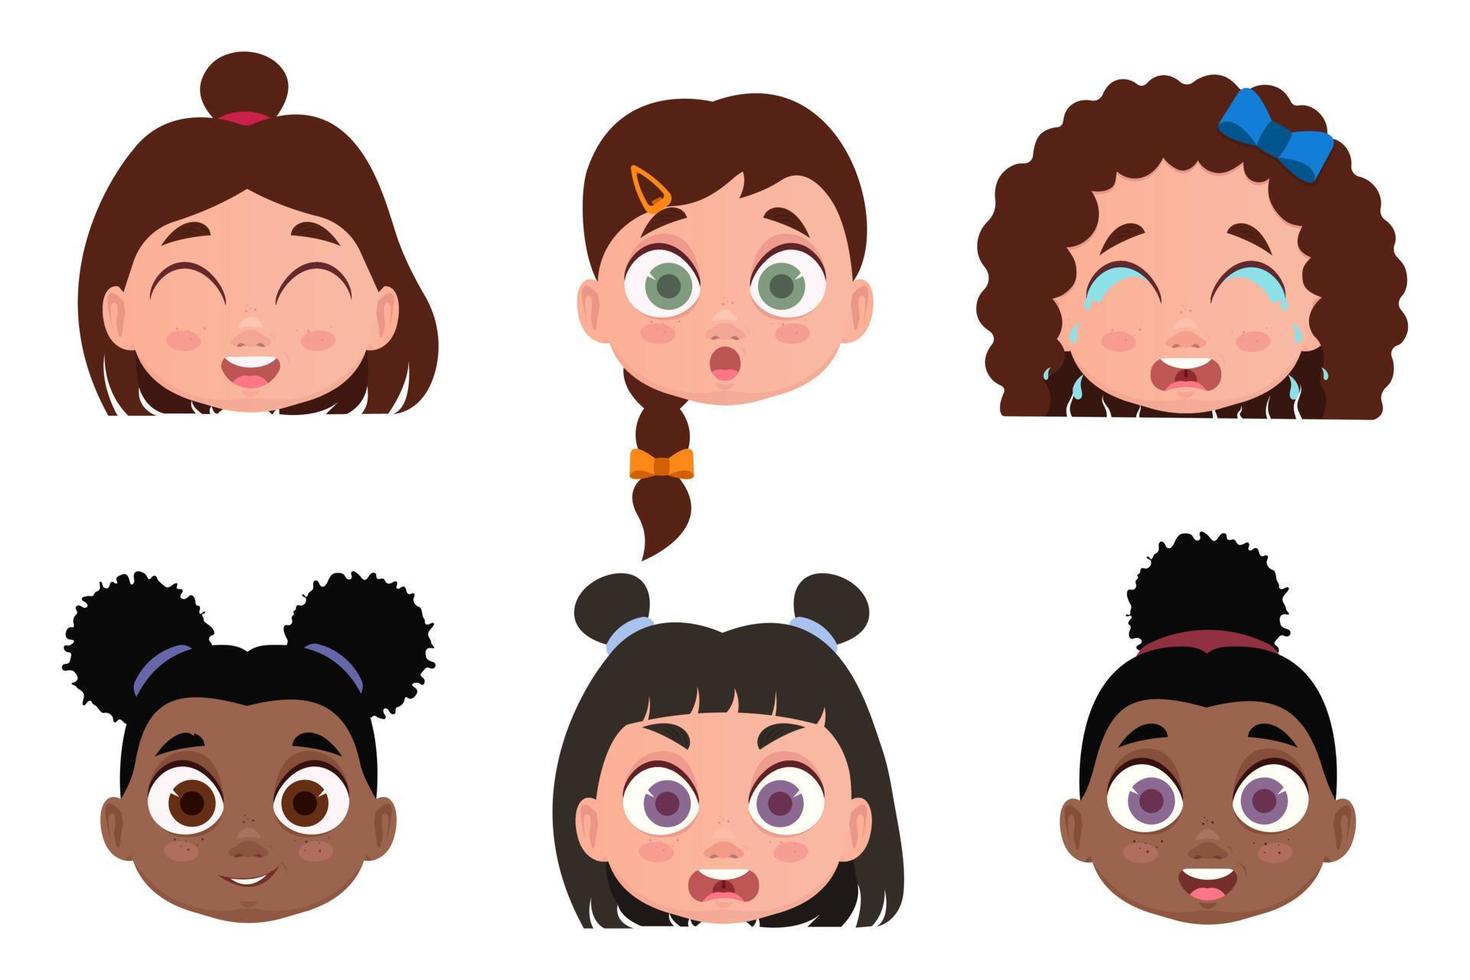 Children's faces. Baby face expression, cartoon avatars vector collection